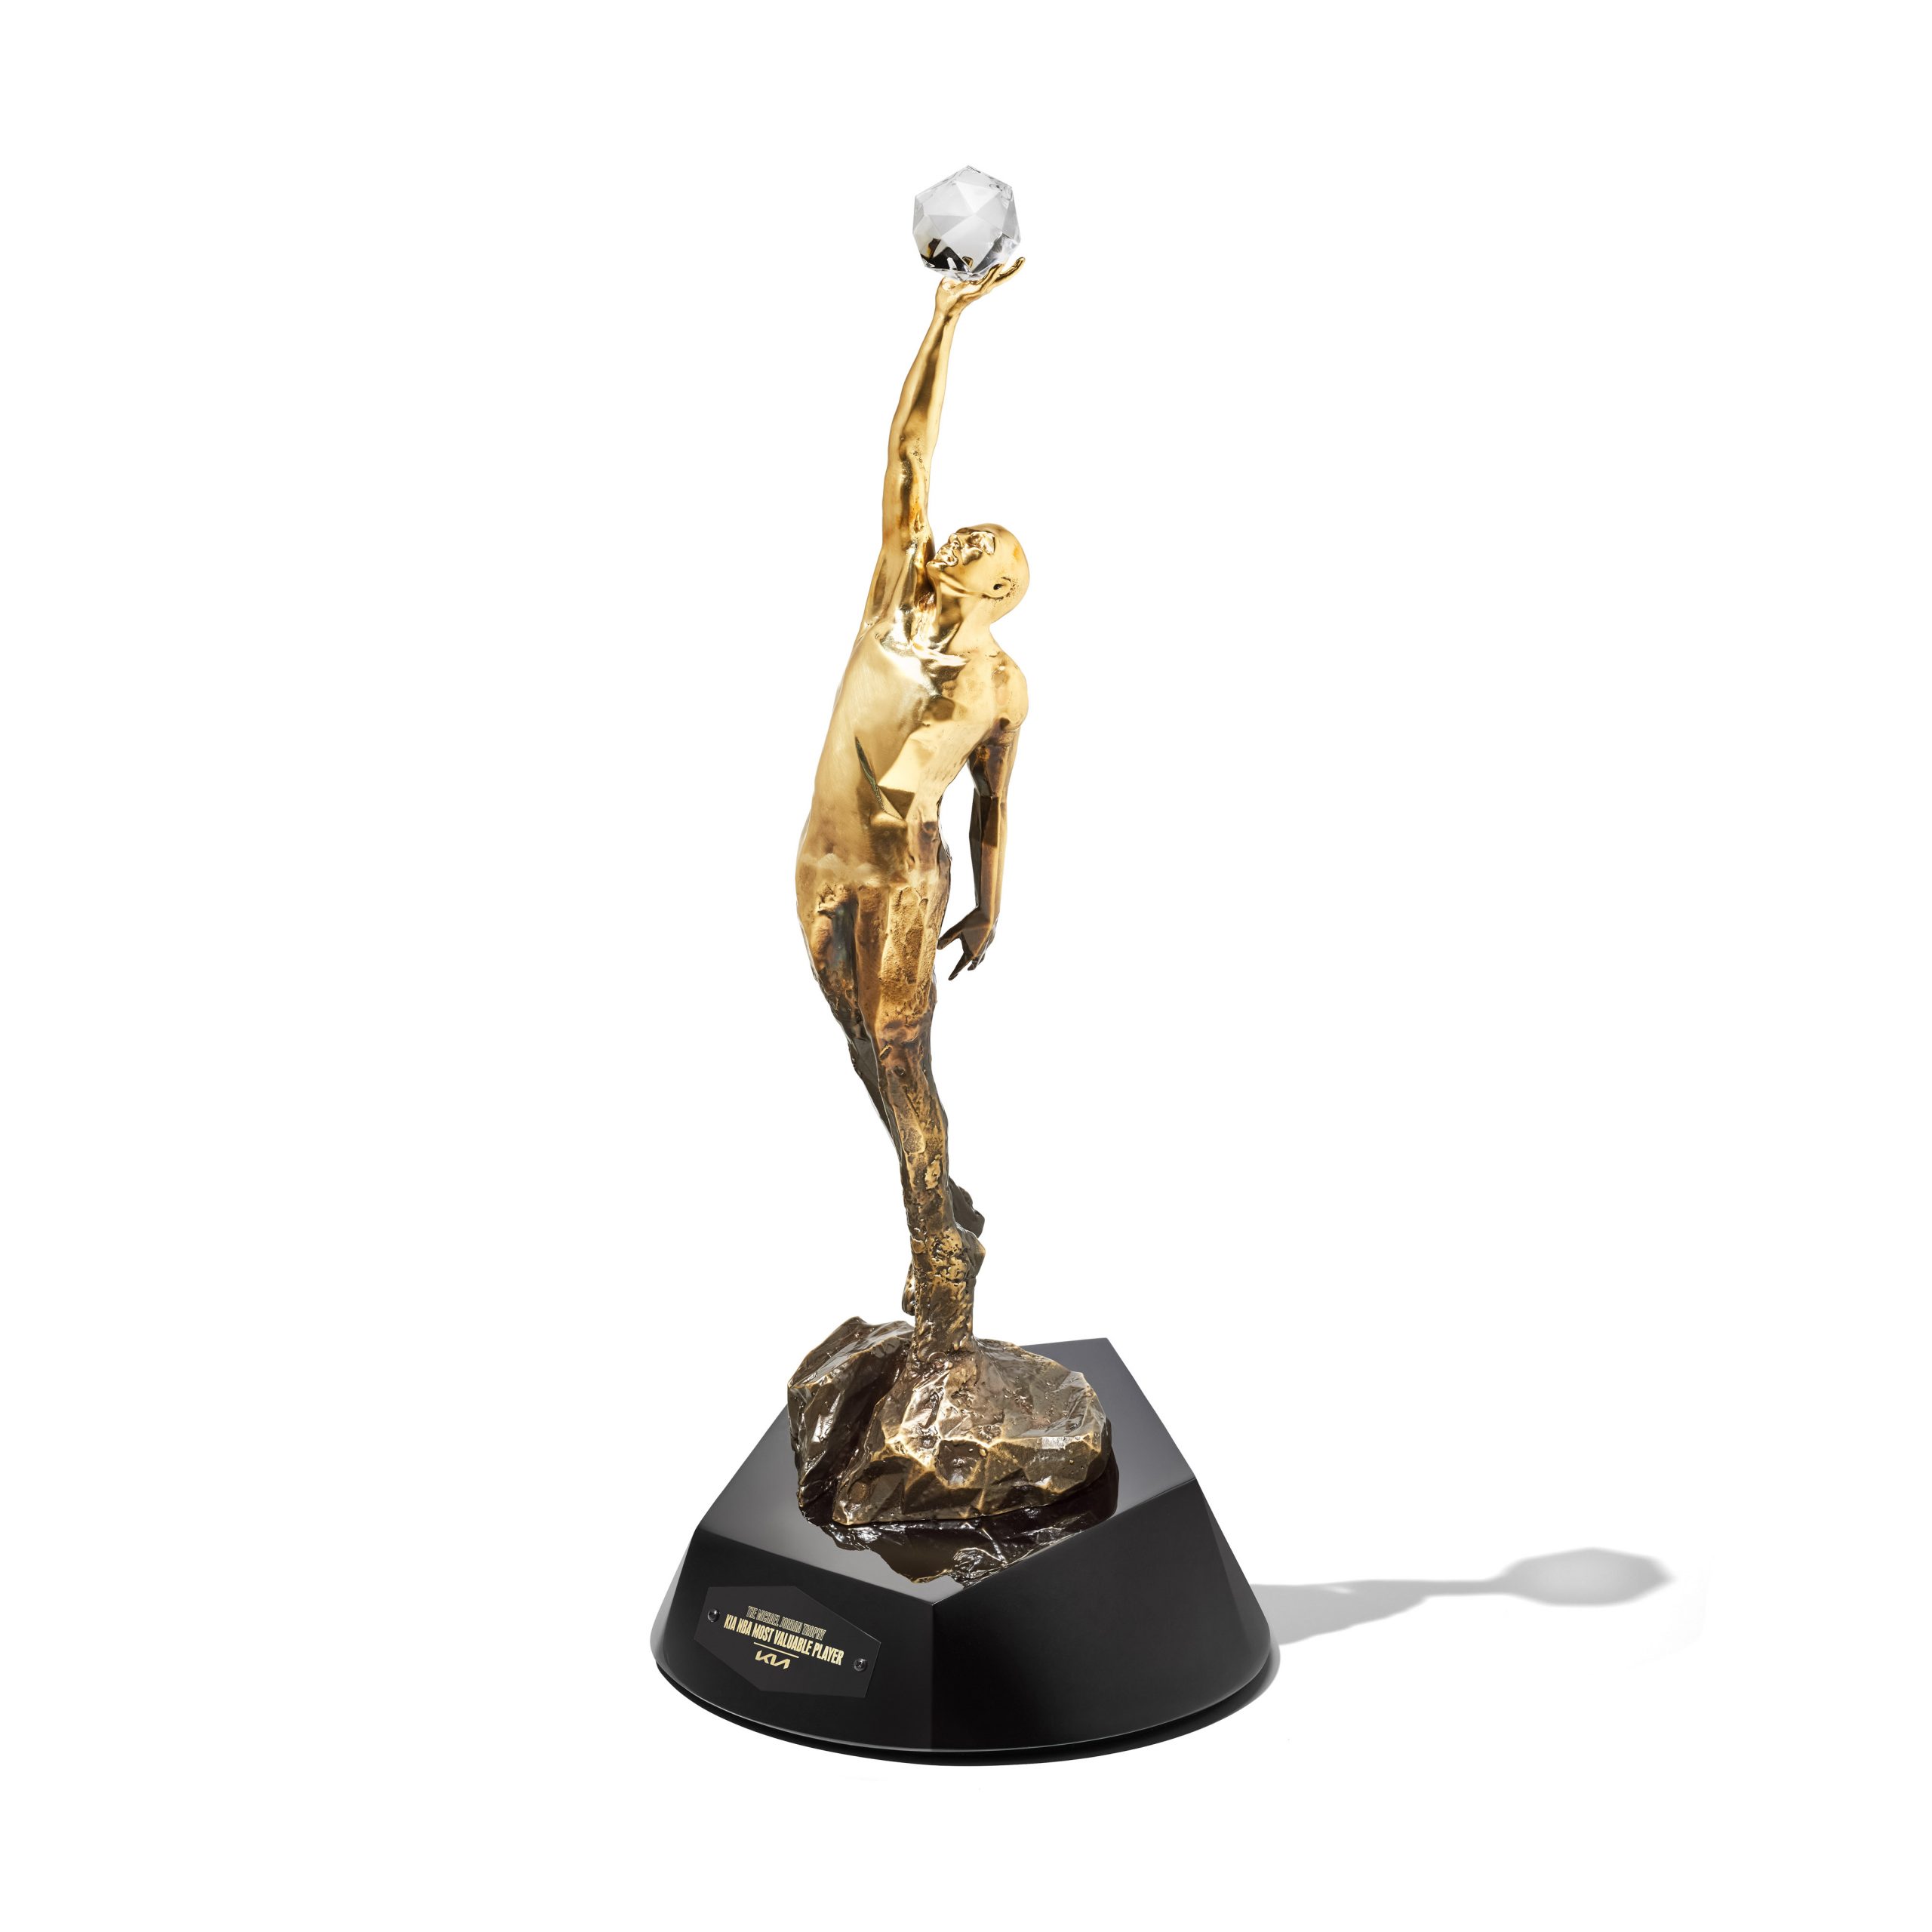 The Michael Jordan Trophy, to be awarded to the NBA's MVP....